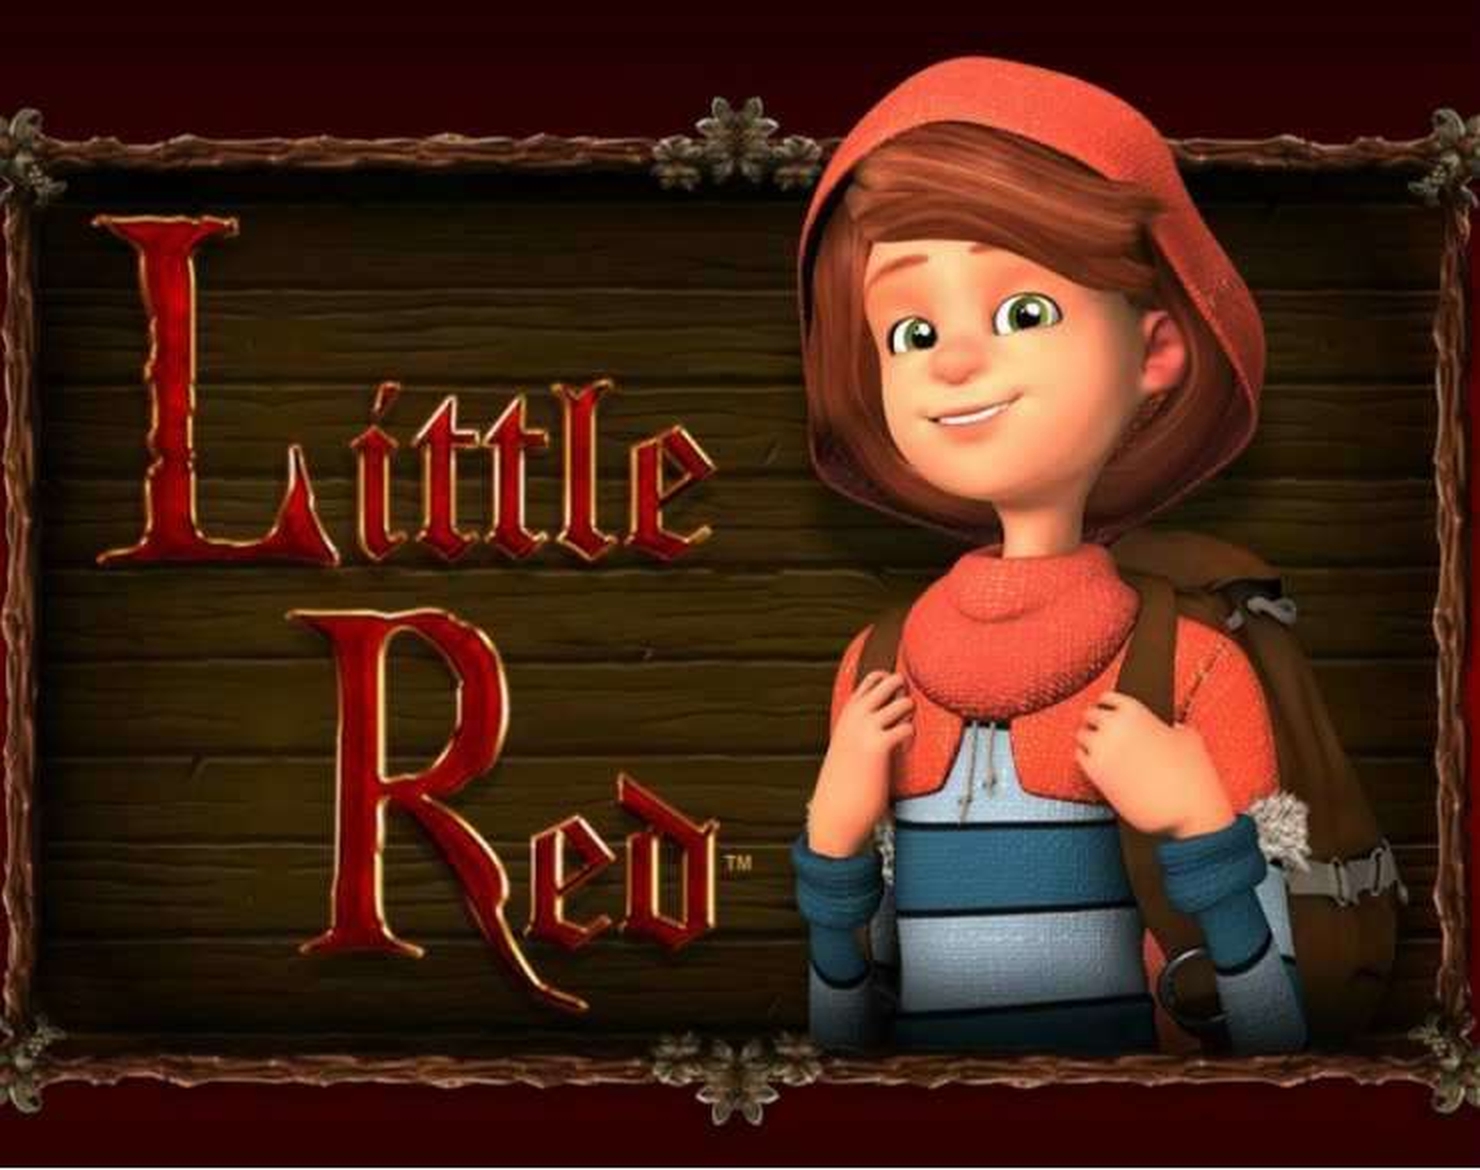 Little Red Riding Hood demo